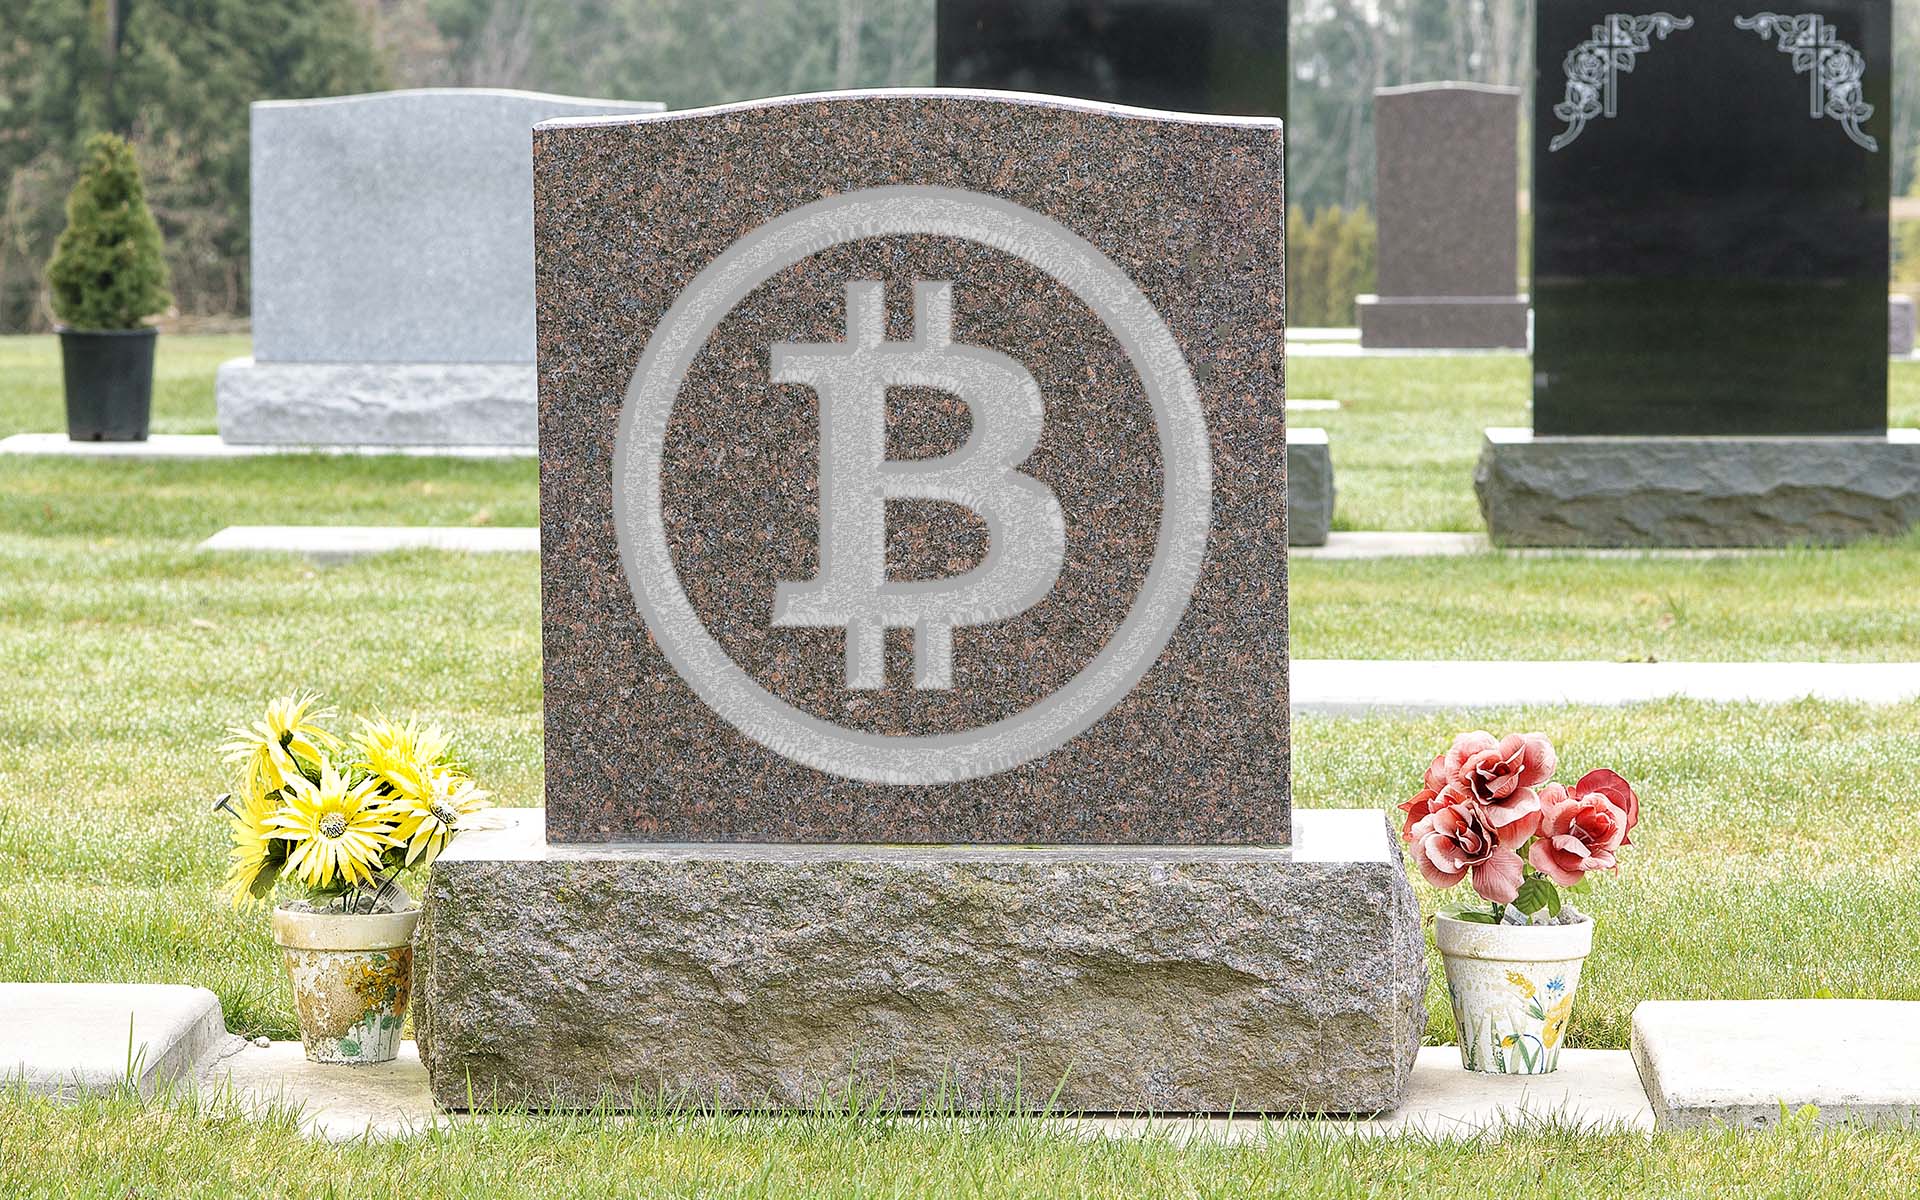 People’s Bank of China Deputy Governor: ‘Bitcoin is Dying’